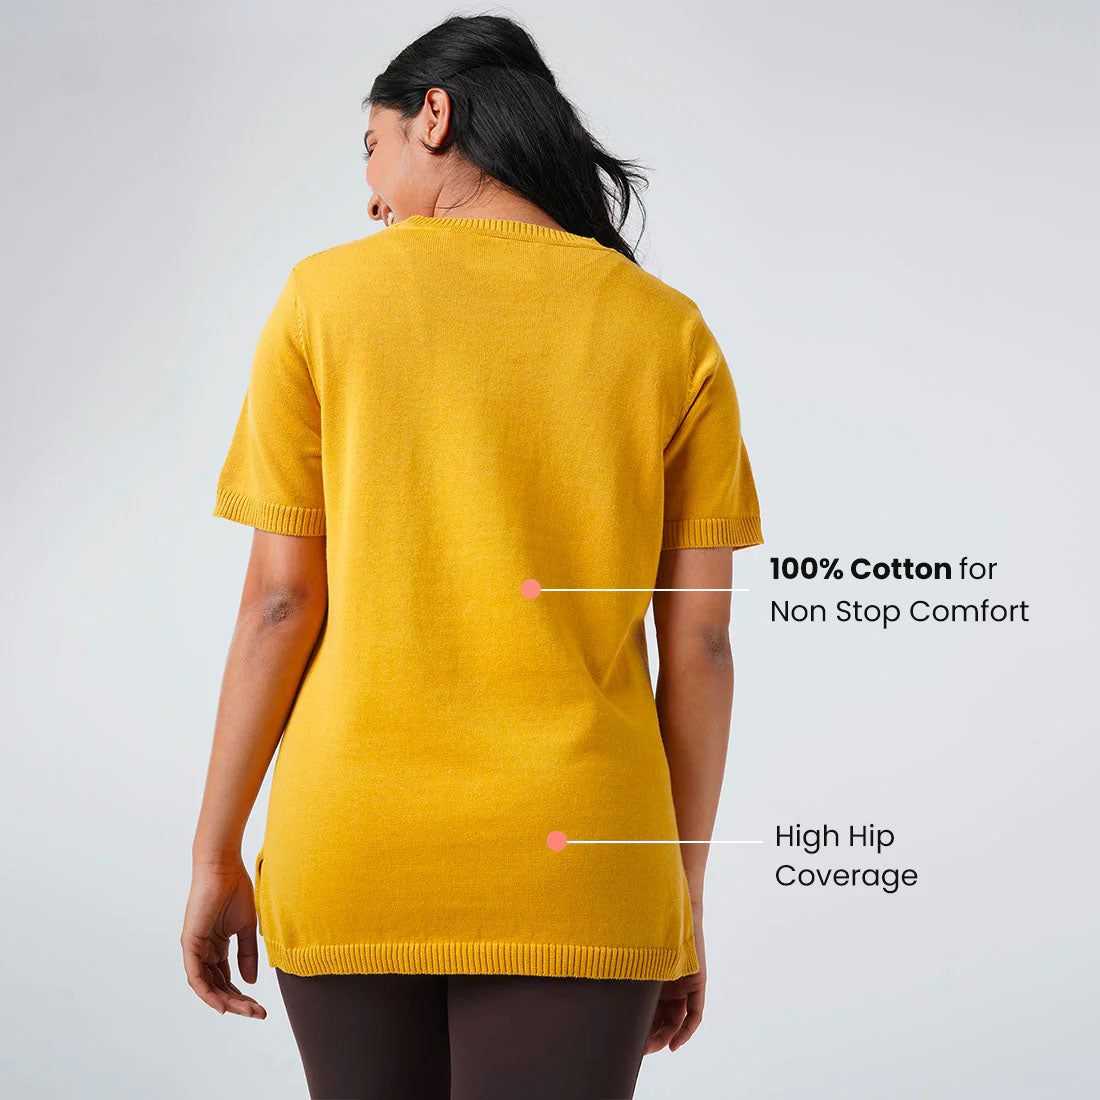 The At-Ease Cotton Knit Top